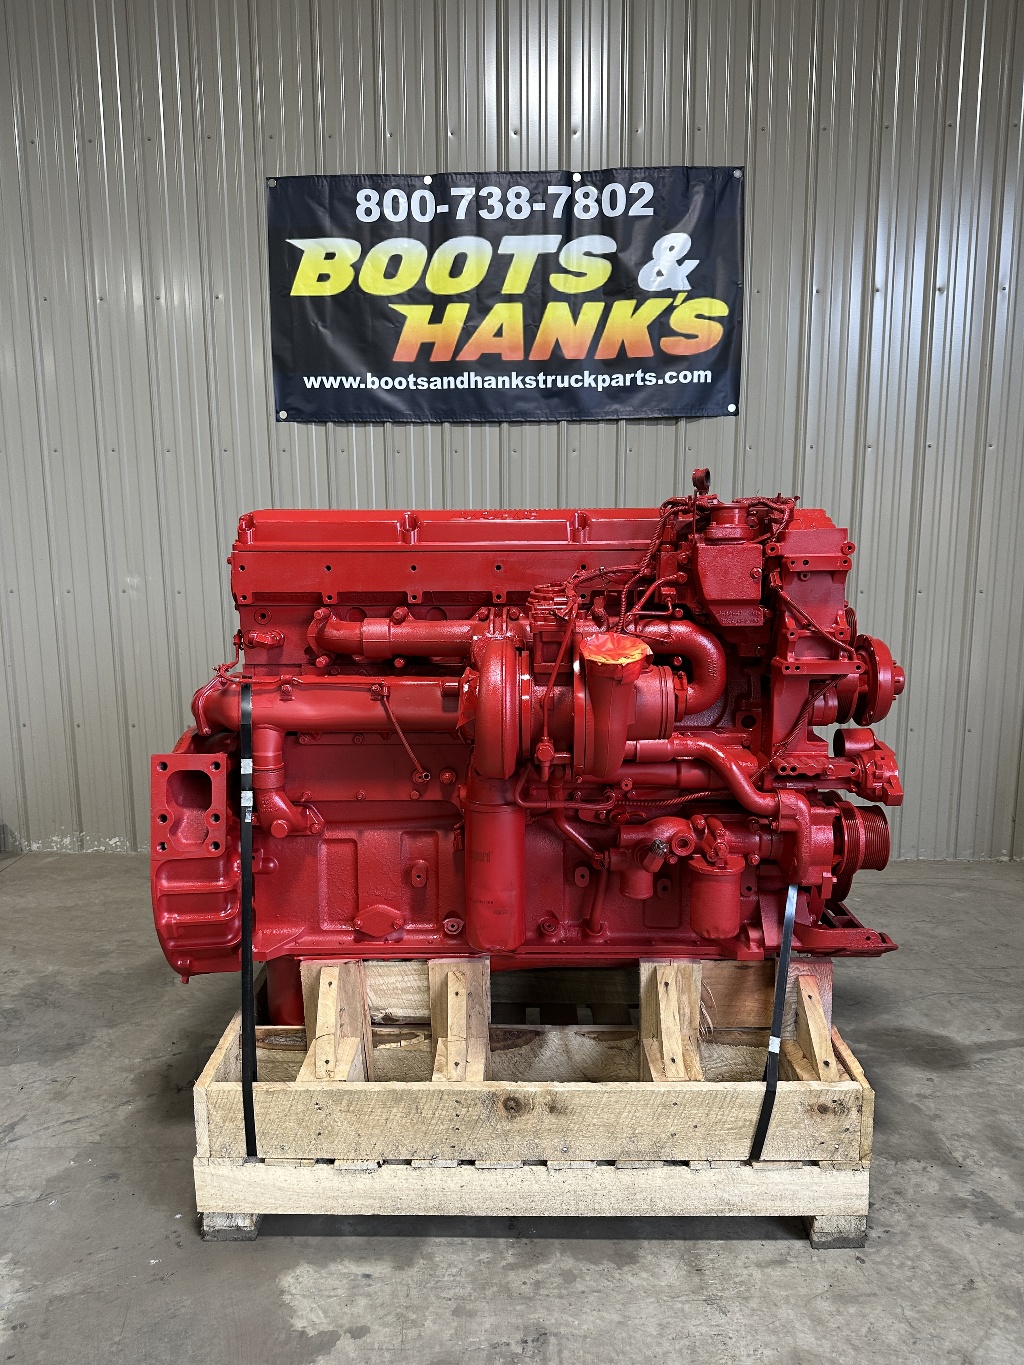 USED 2008 CUMMINS ISX COMPLETE ENGINE TRUCK PARTS #1958